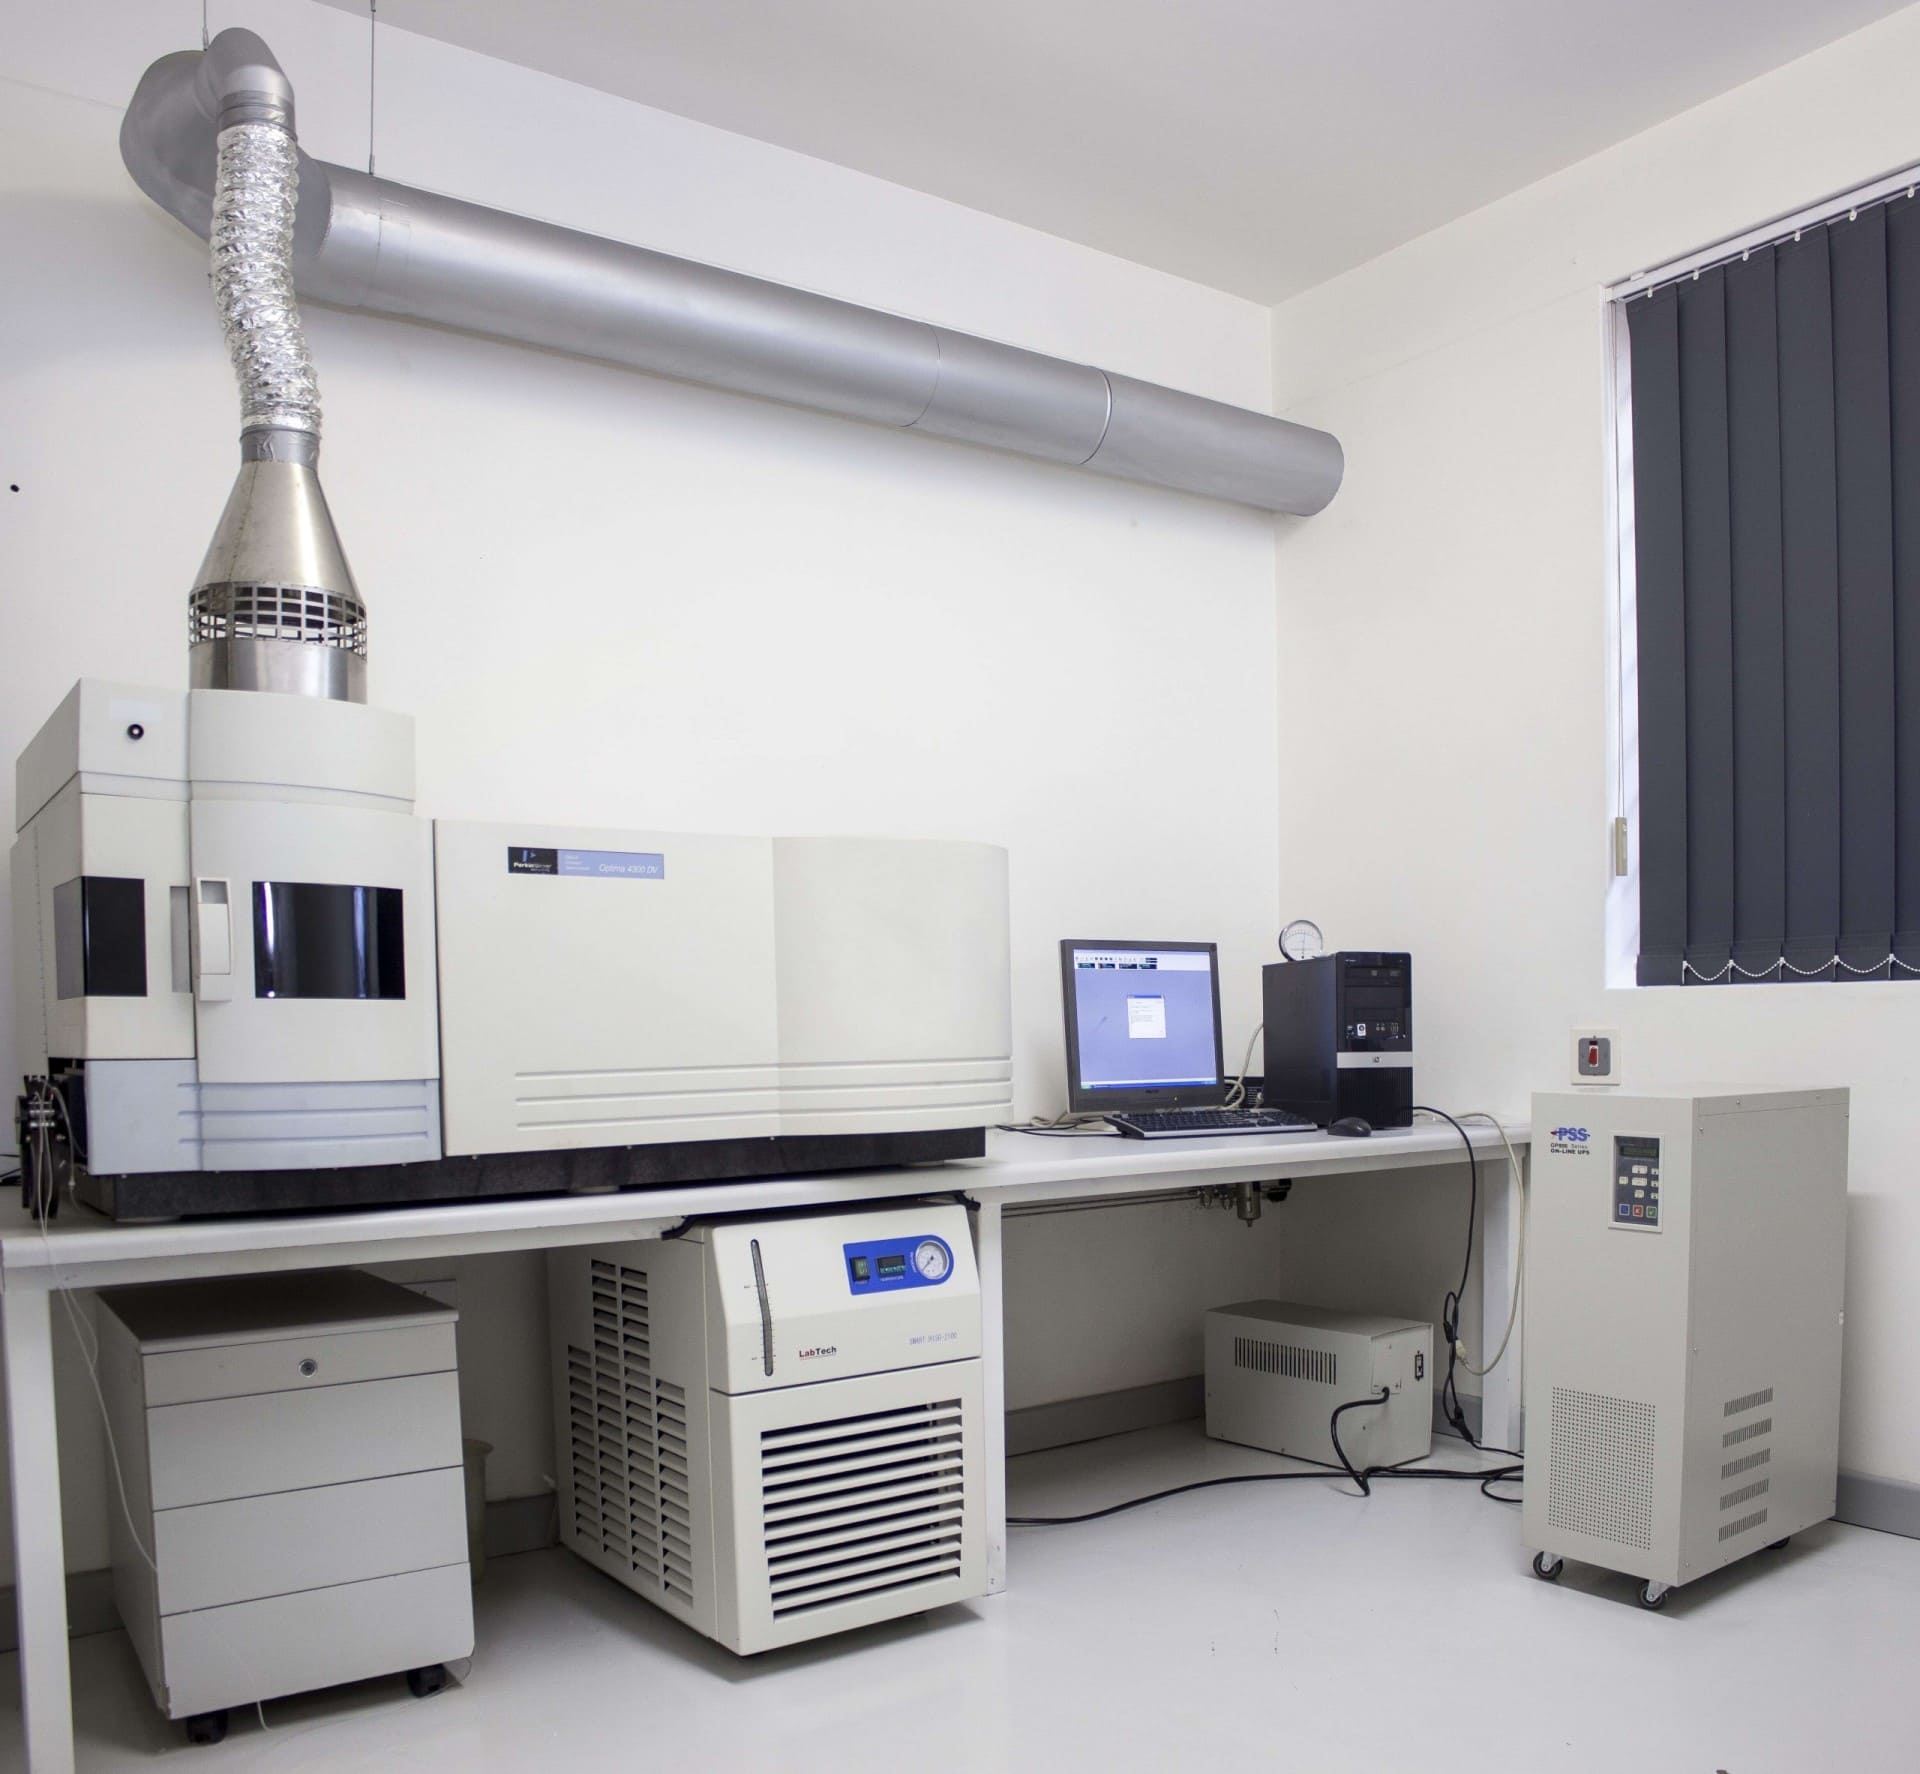 Tag_Post_Pratley upgrades its research laboratories with the latest tech